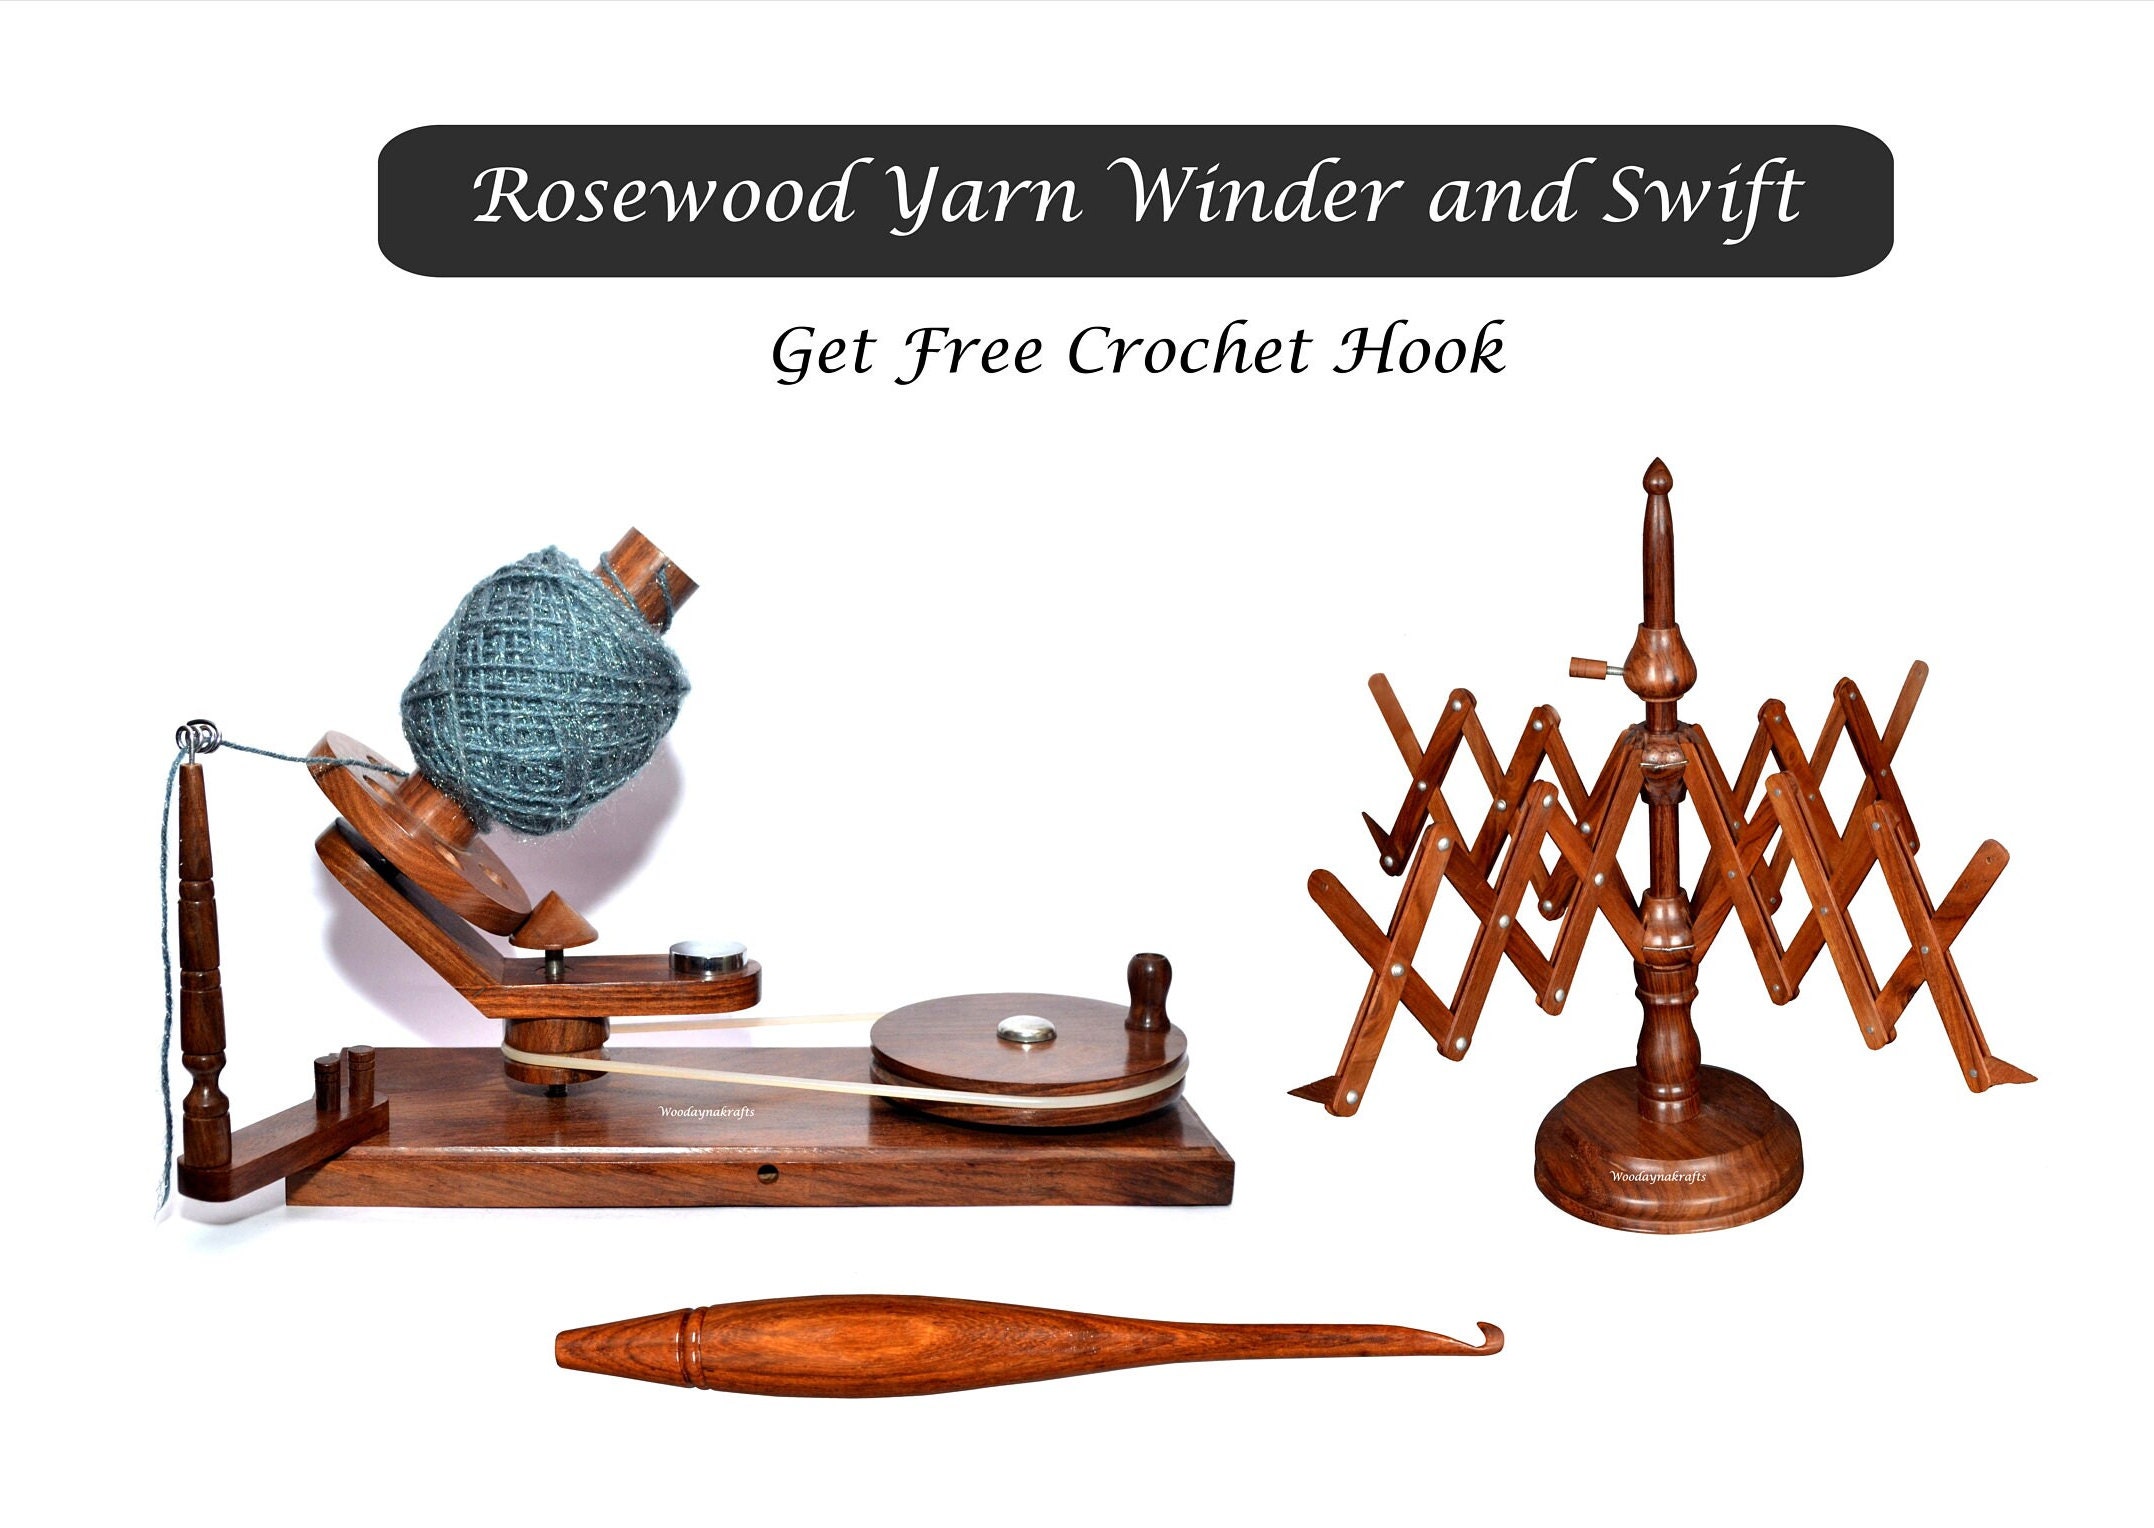 Yarn Winder and Swift Yarn Winder Combo Hand-operated Ball Winder Knitter's  Gifts Center Handcrafted Skein Winder Christmas Day Gift 